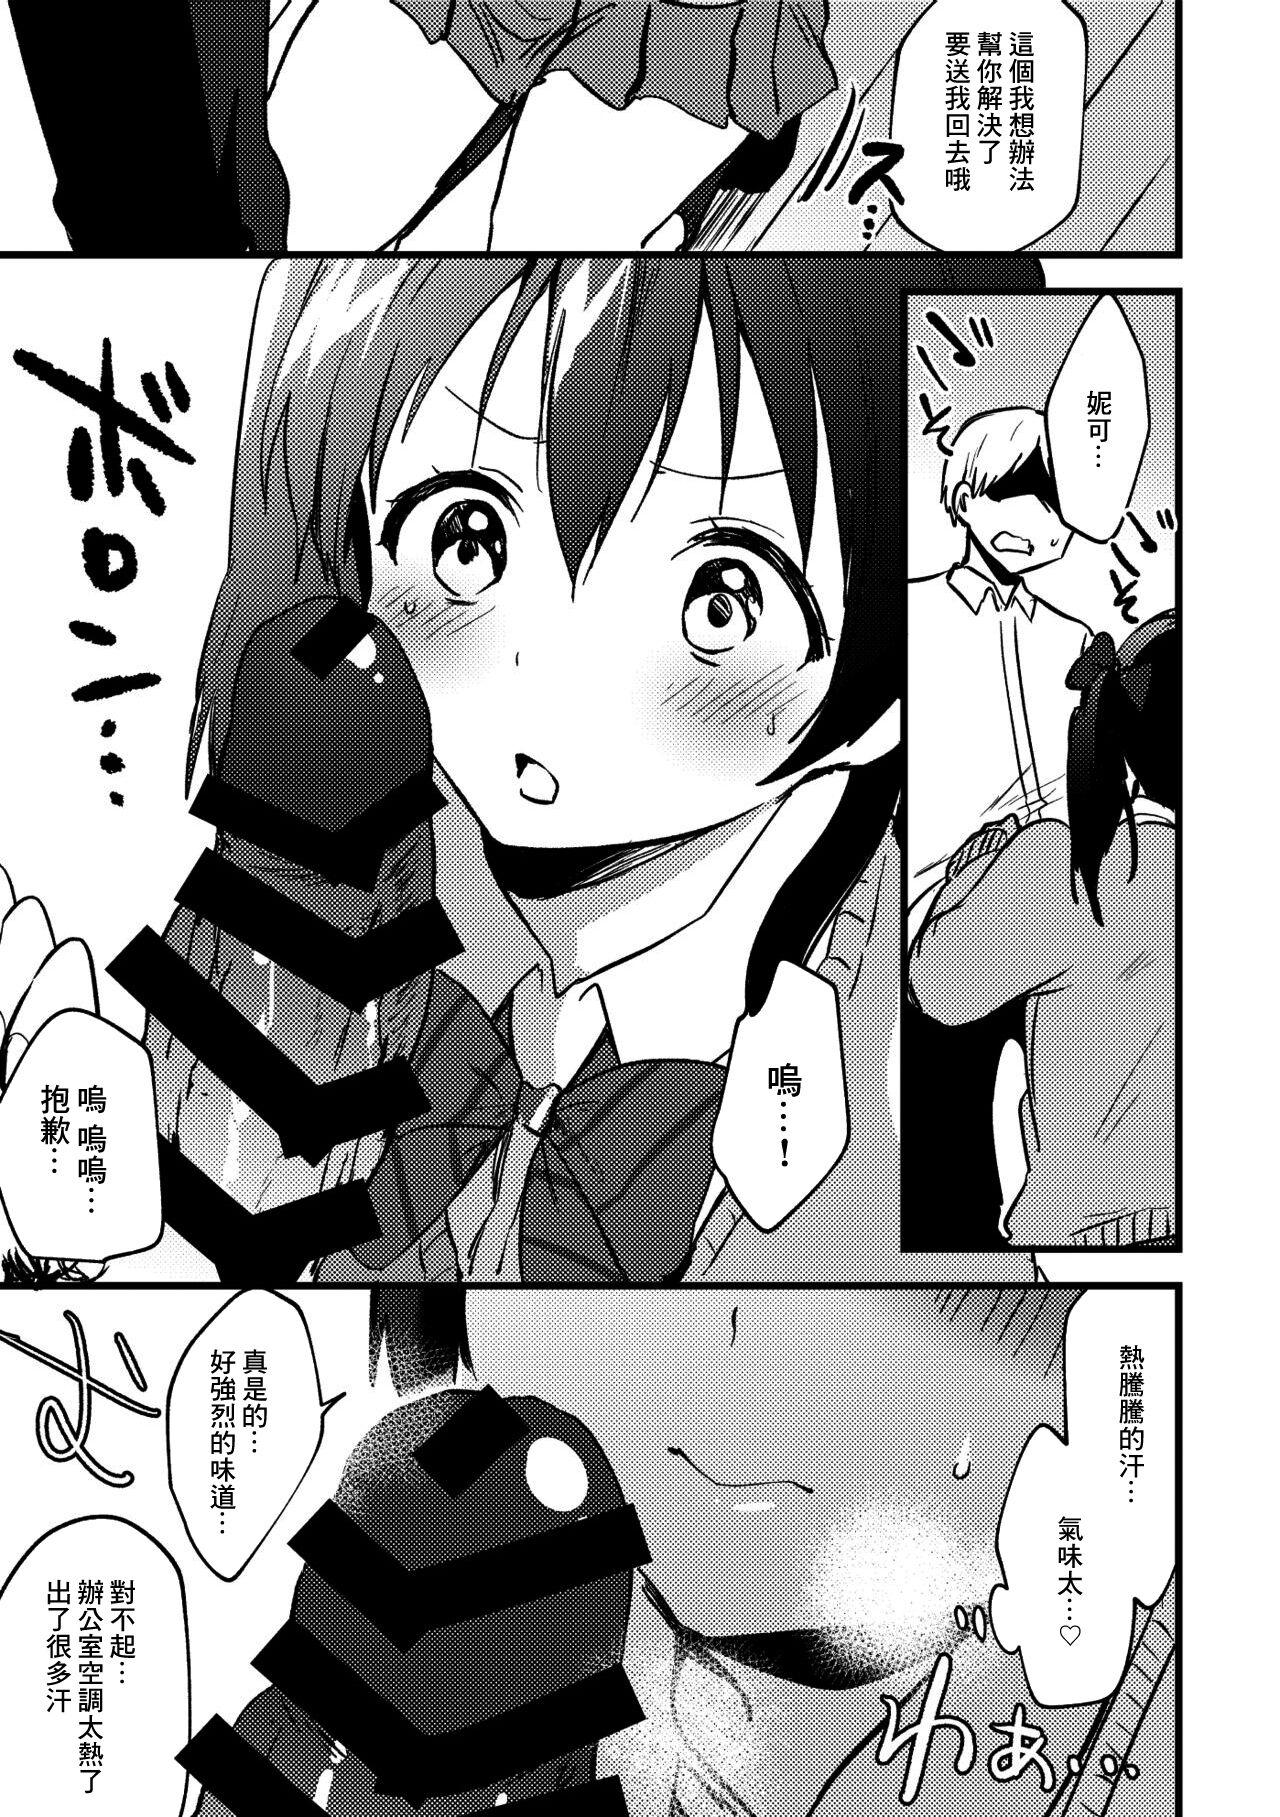 Strap On Omakebon - Love live Tittyfuck - Page 4